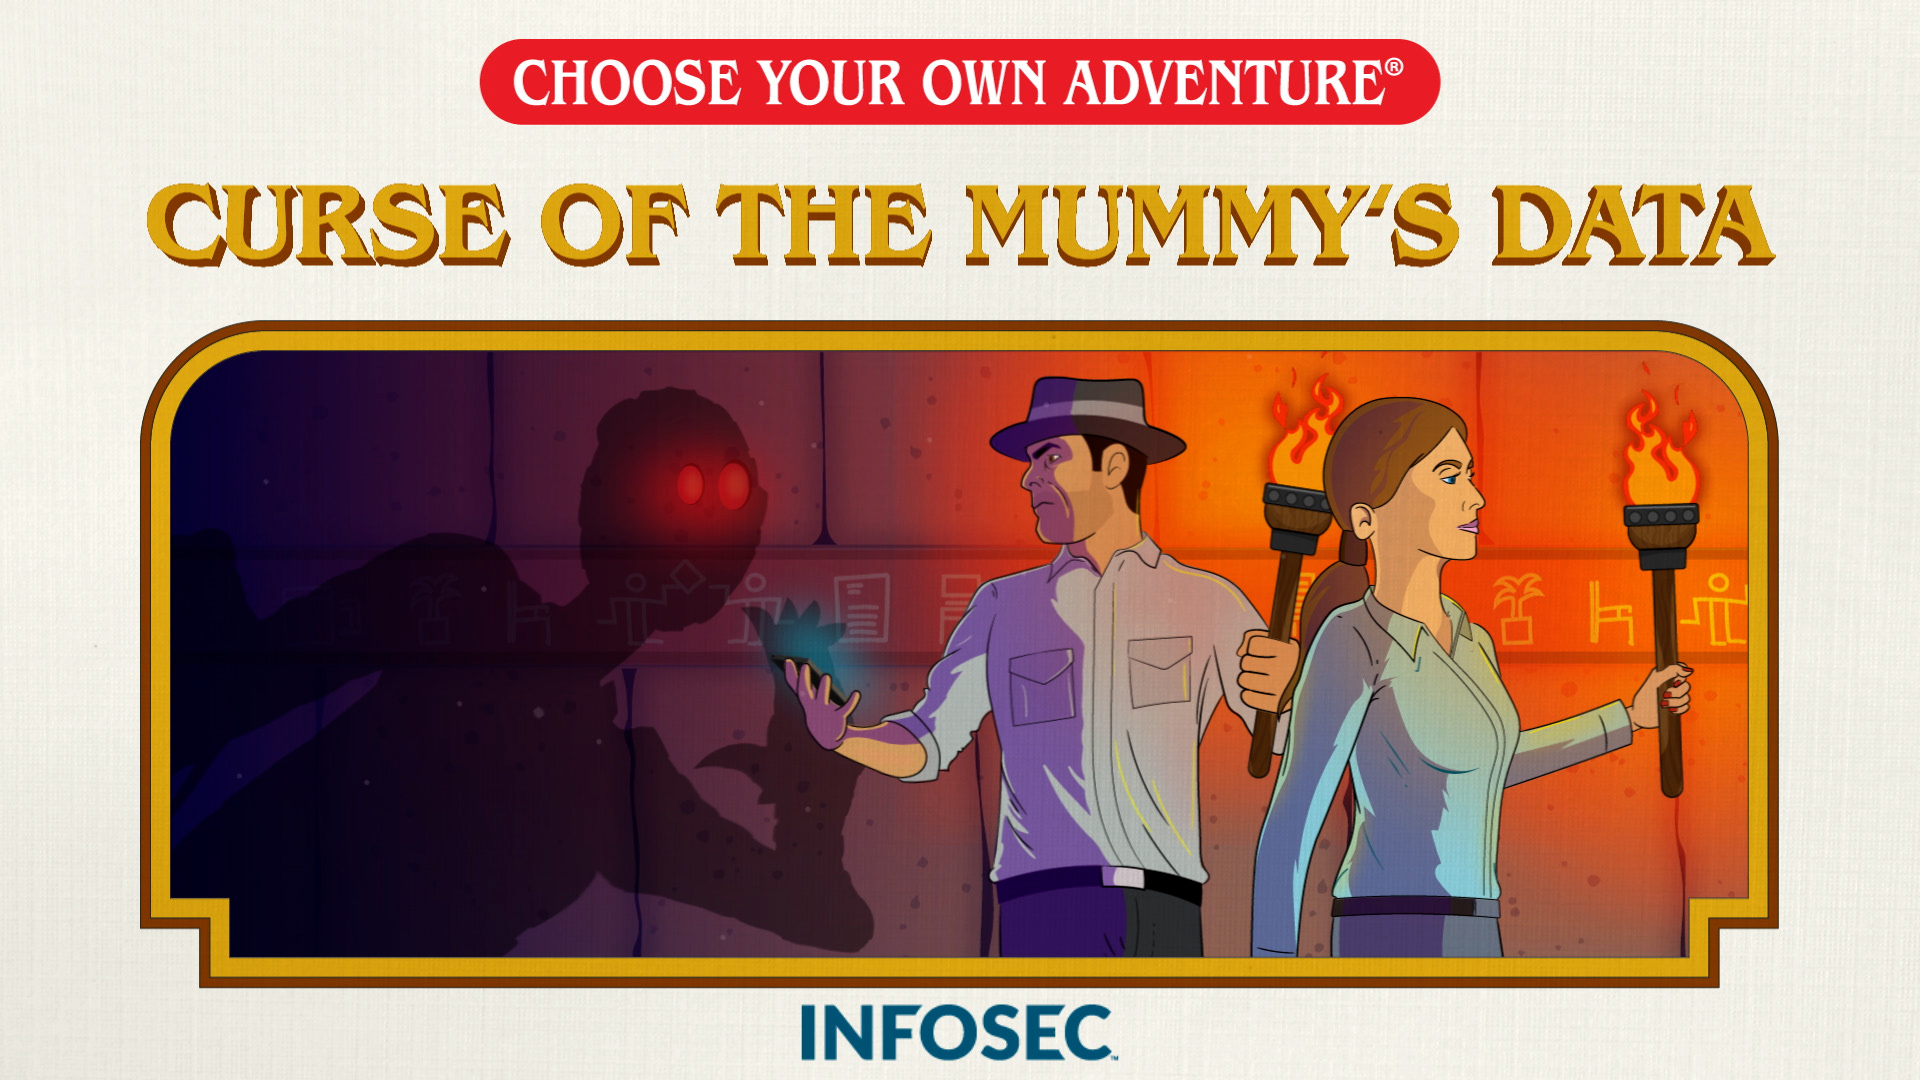 Choose Your Own Adventure: Curse of the Mummy's Data